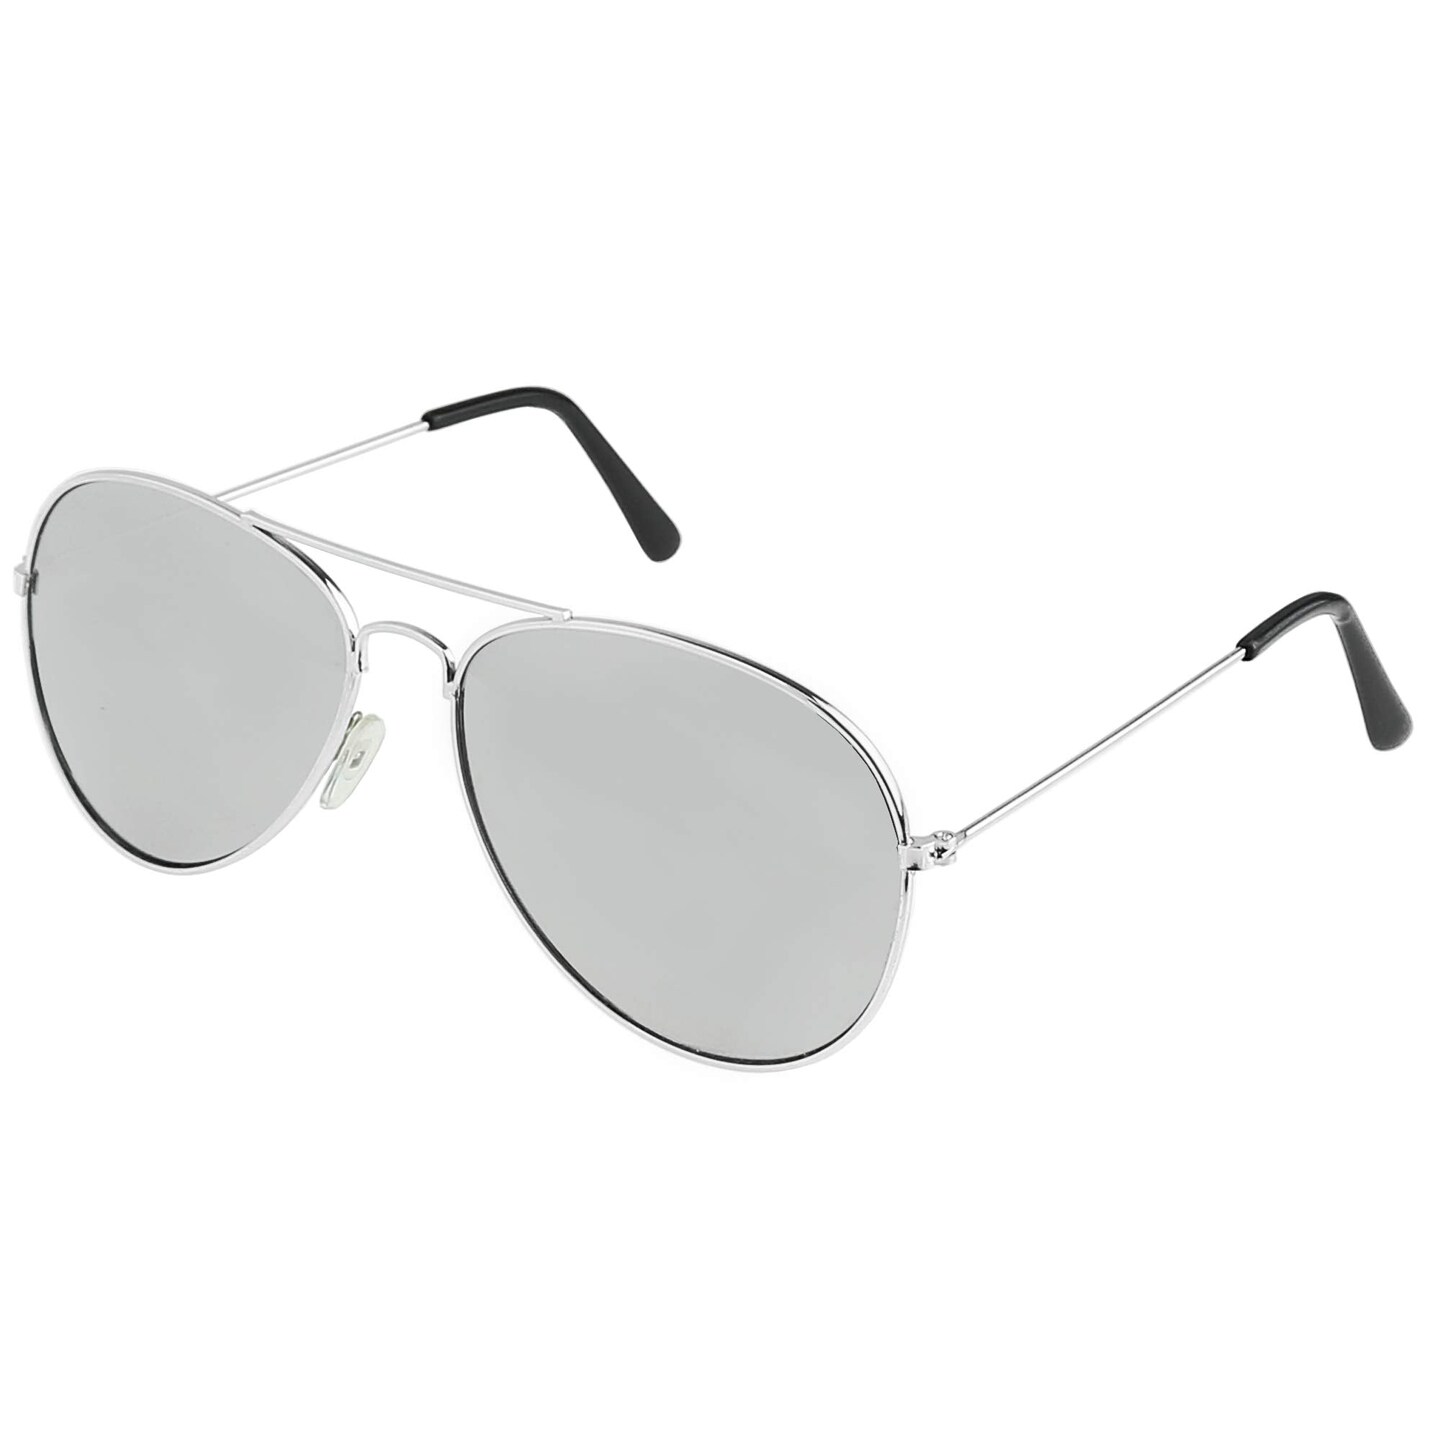 Silver Mirrored Aviator Sunglasses Military Style Mirror Sun Glasses With Metal Frame And Uv